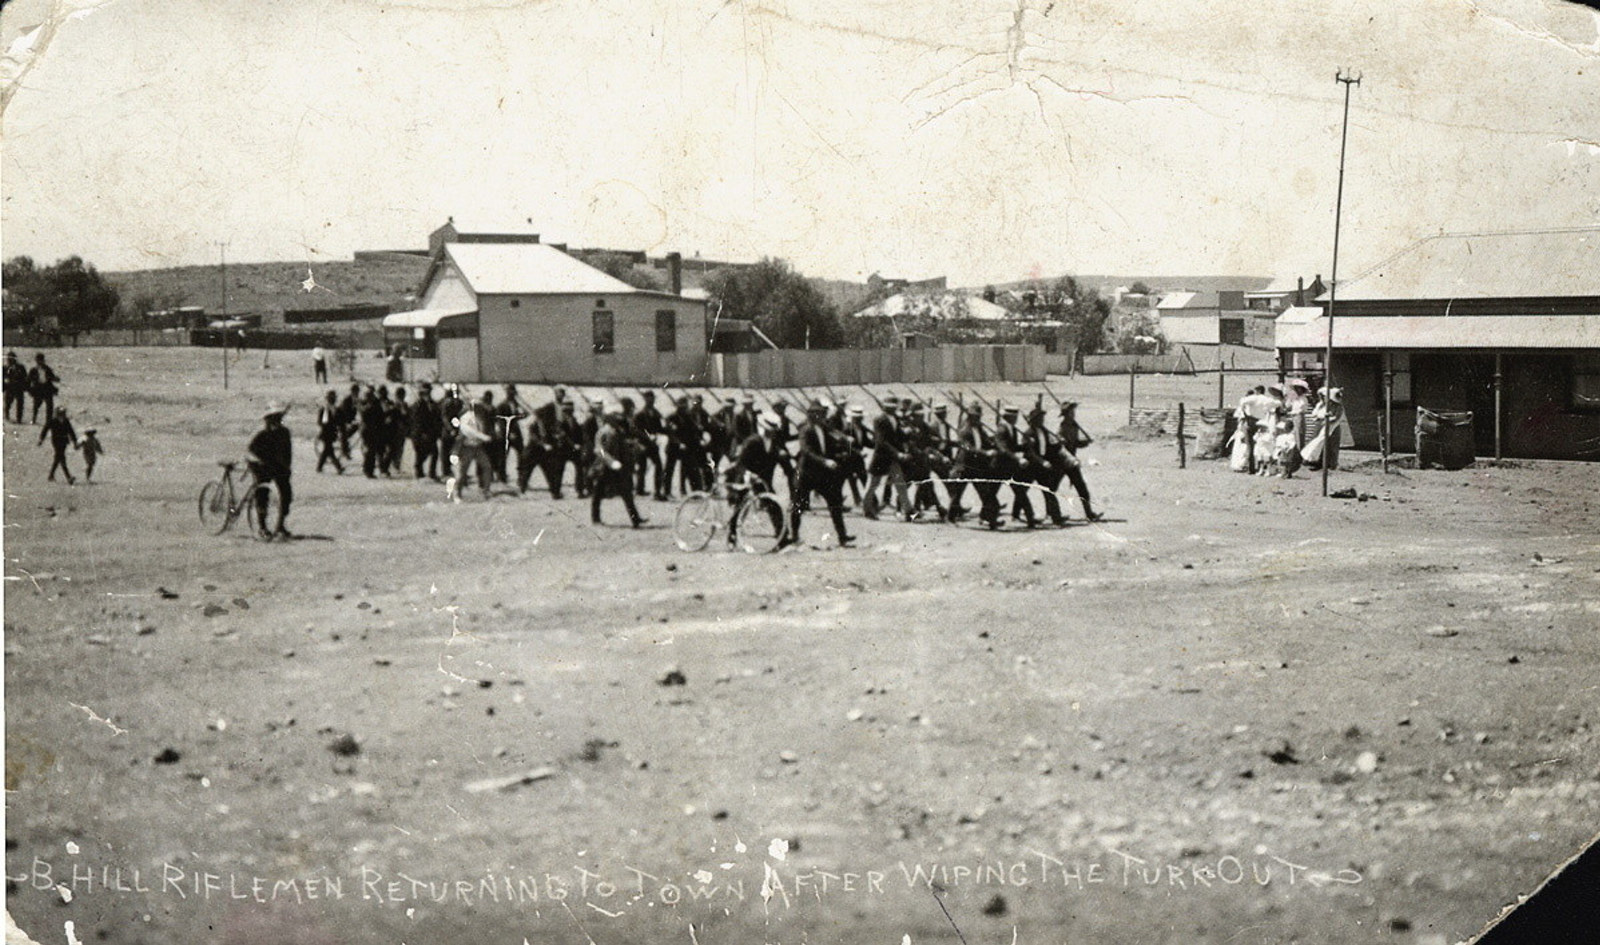 Group of men in formation in middle ground of large open area with buildings behind.